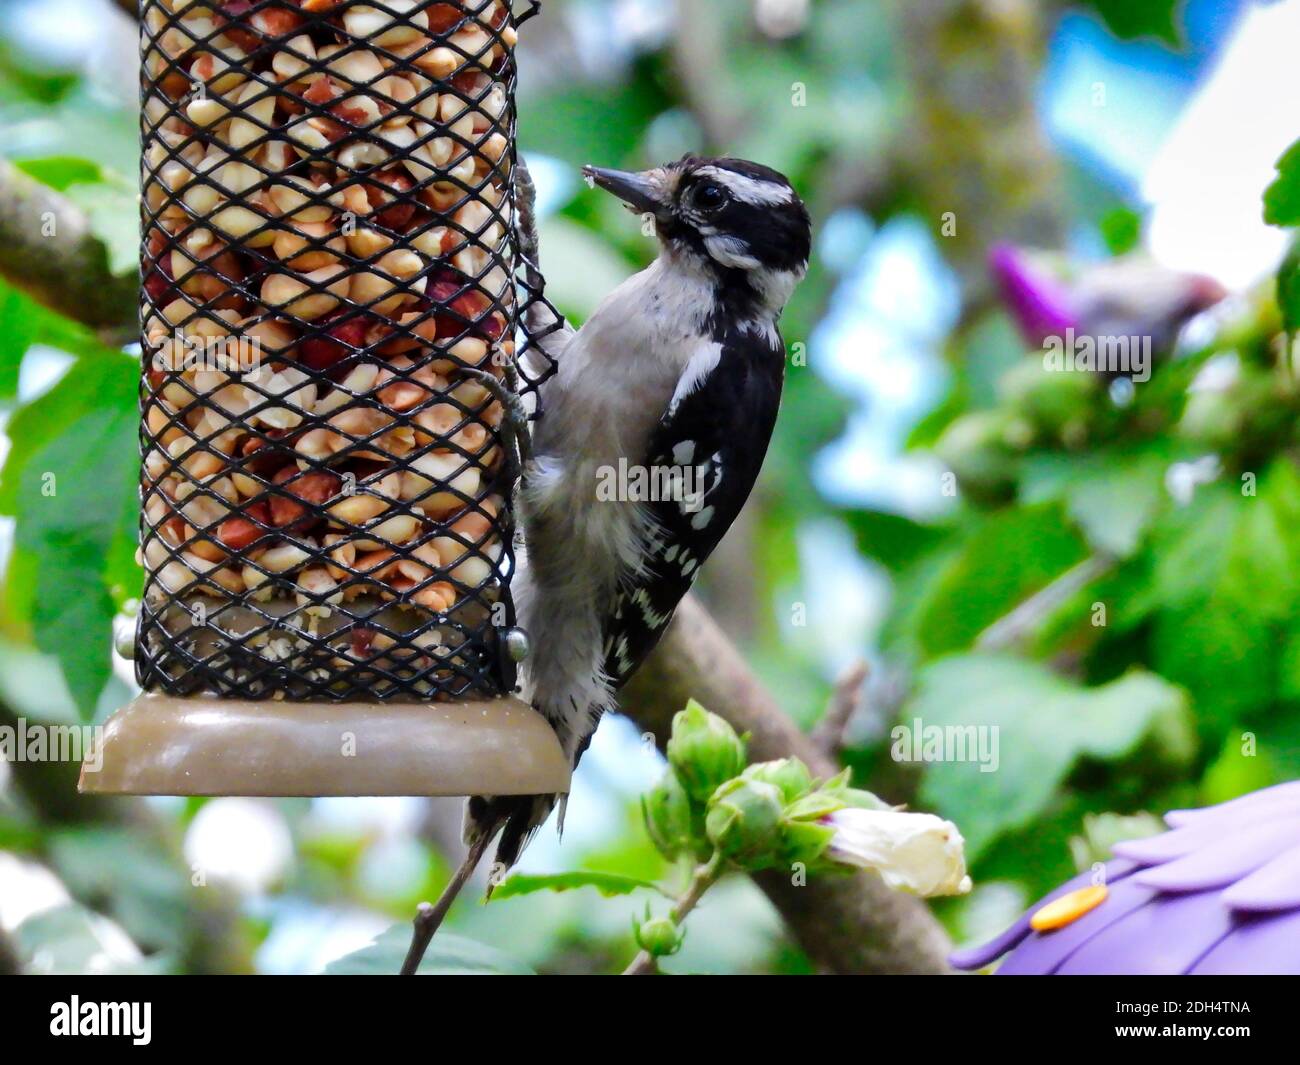 A Downy Woodpecker Bird Hangs onto a Bird Feeder Grabbing a Snack of Peanuts with Green Leaves and Hibiscus Flowers in the Background Stock Photo